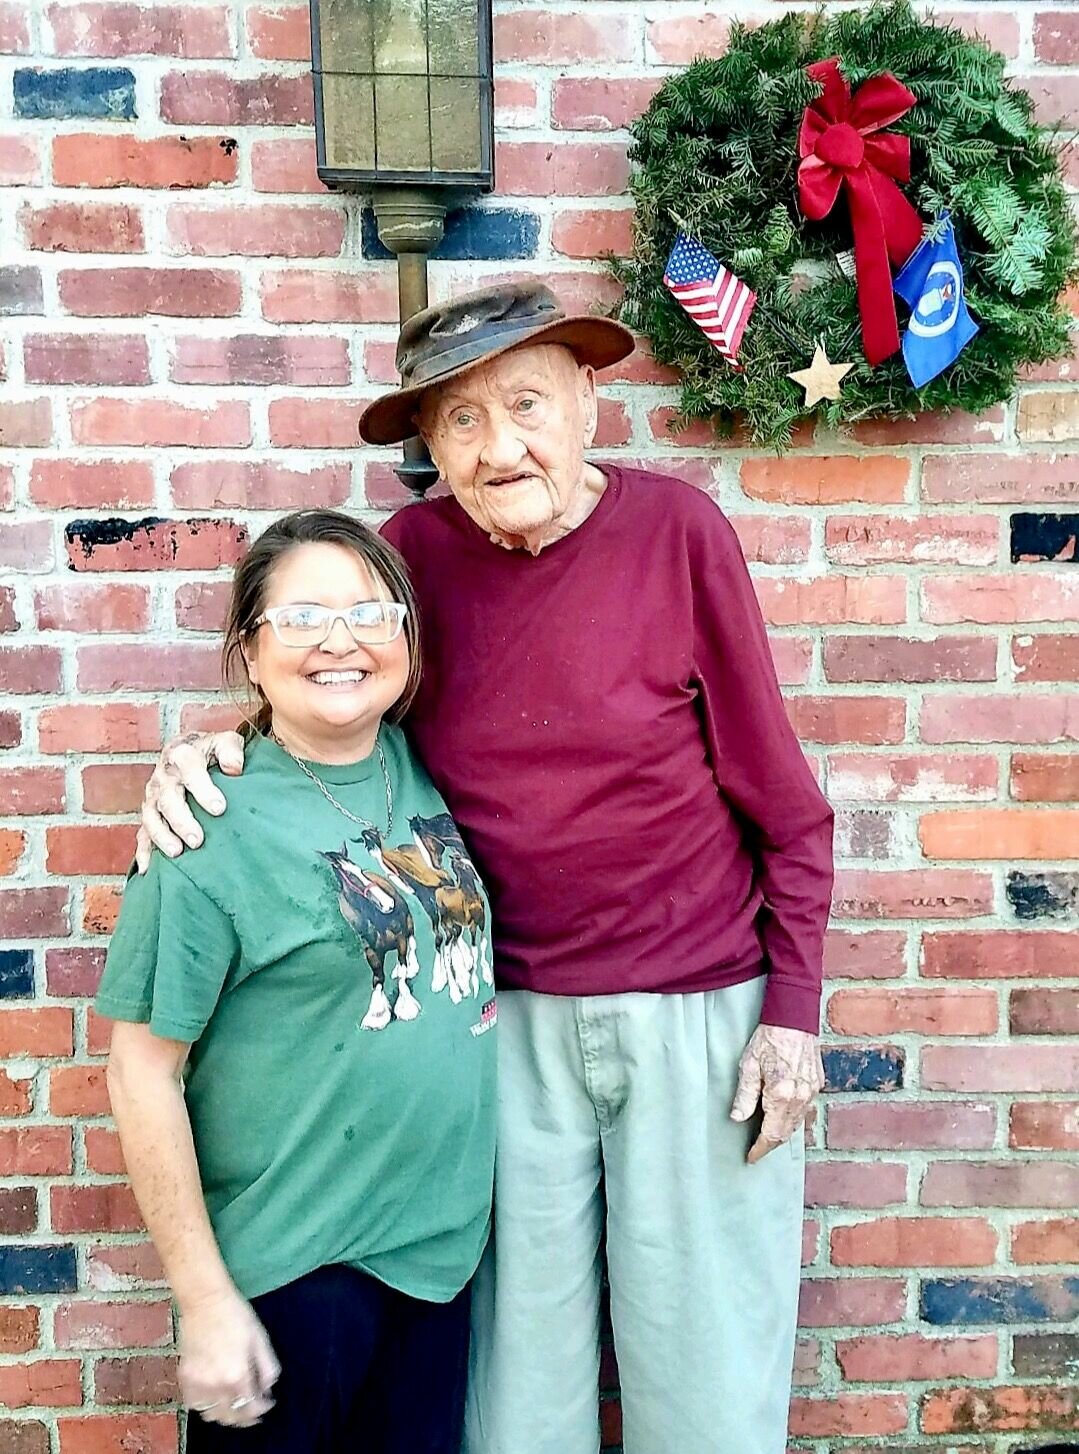 Jessica Joice-Frazier, left, West Plains, recently dropped by to visit friend Joe Spears, a World War II veteran, and present him a wreath in honor of his military service. Spears, also of West Plains, celebrated his 99th birthday Nov. 24.